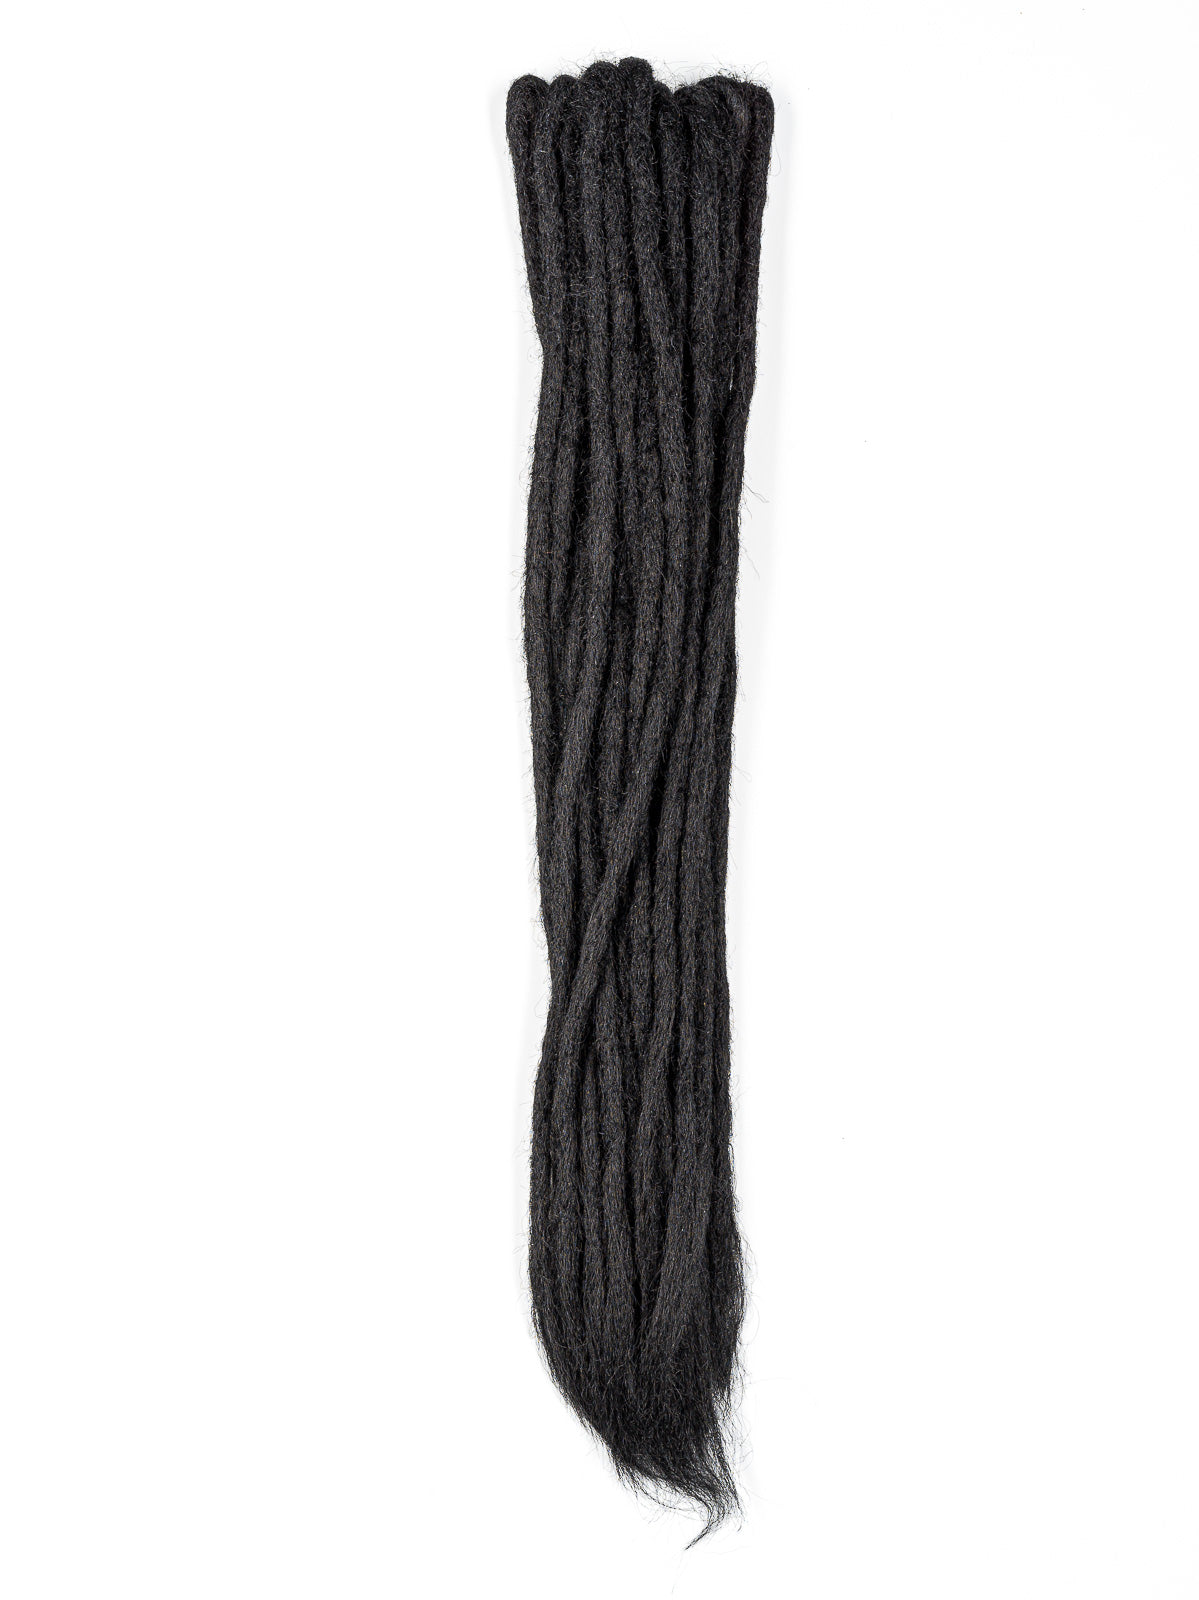 DreadLab - Double Ended Synthetic Dreadlocks (Pack of 10) Crochet Extensions